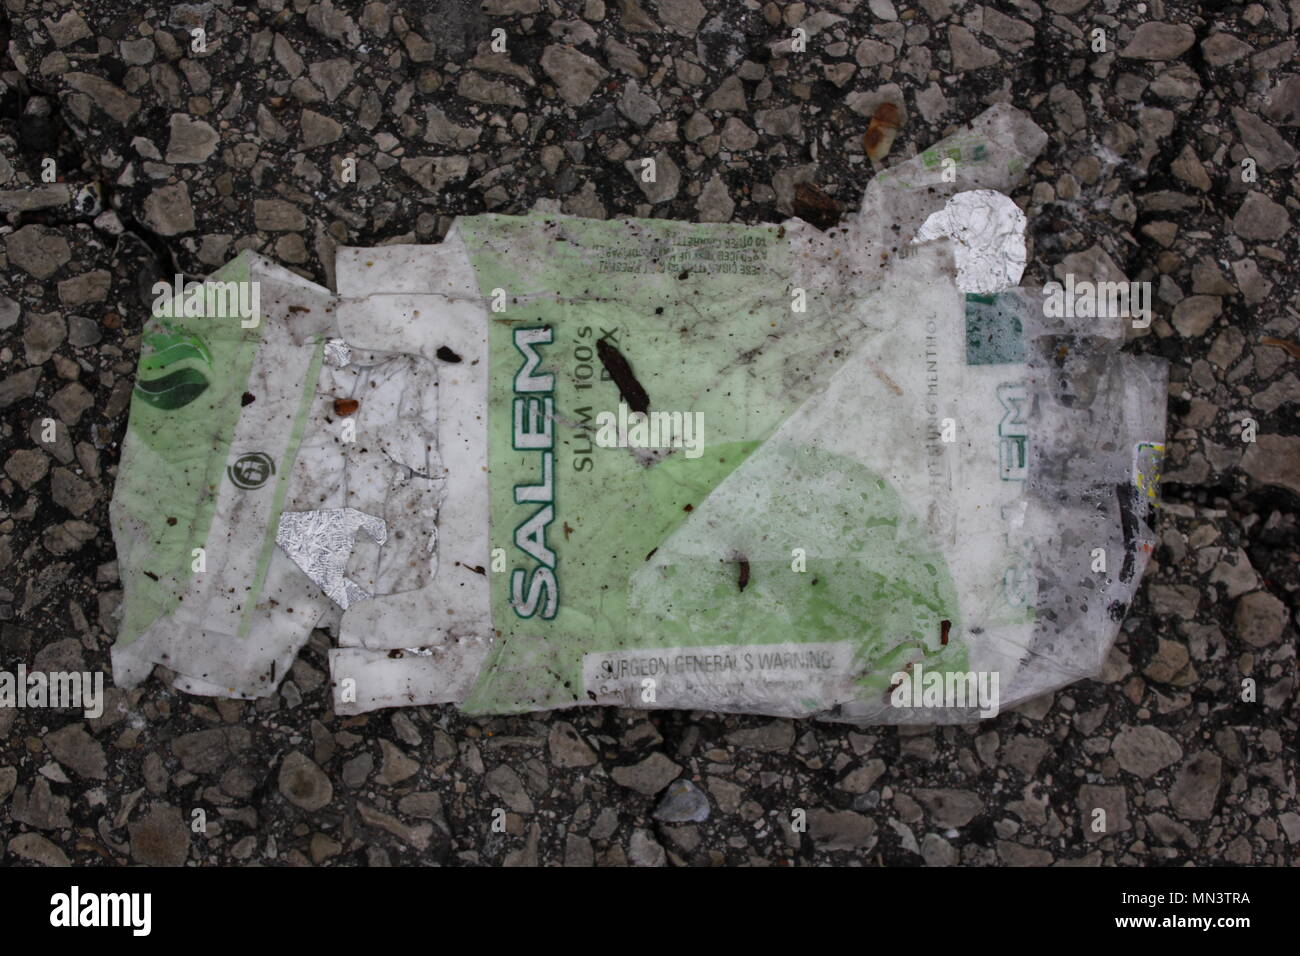 Smushed and flattened empty pack of Salem cigarettes found on the ground in a parking lot. Stock Photo